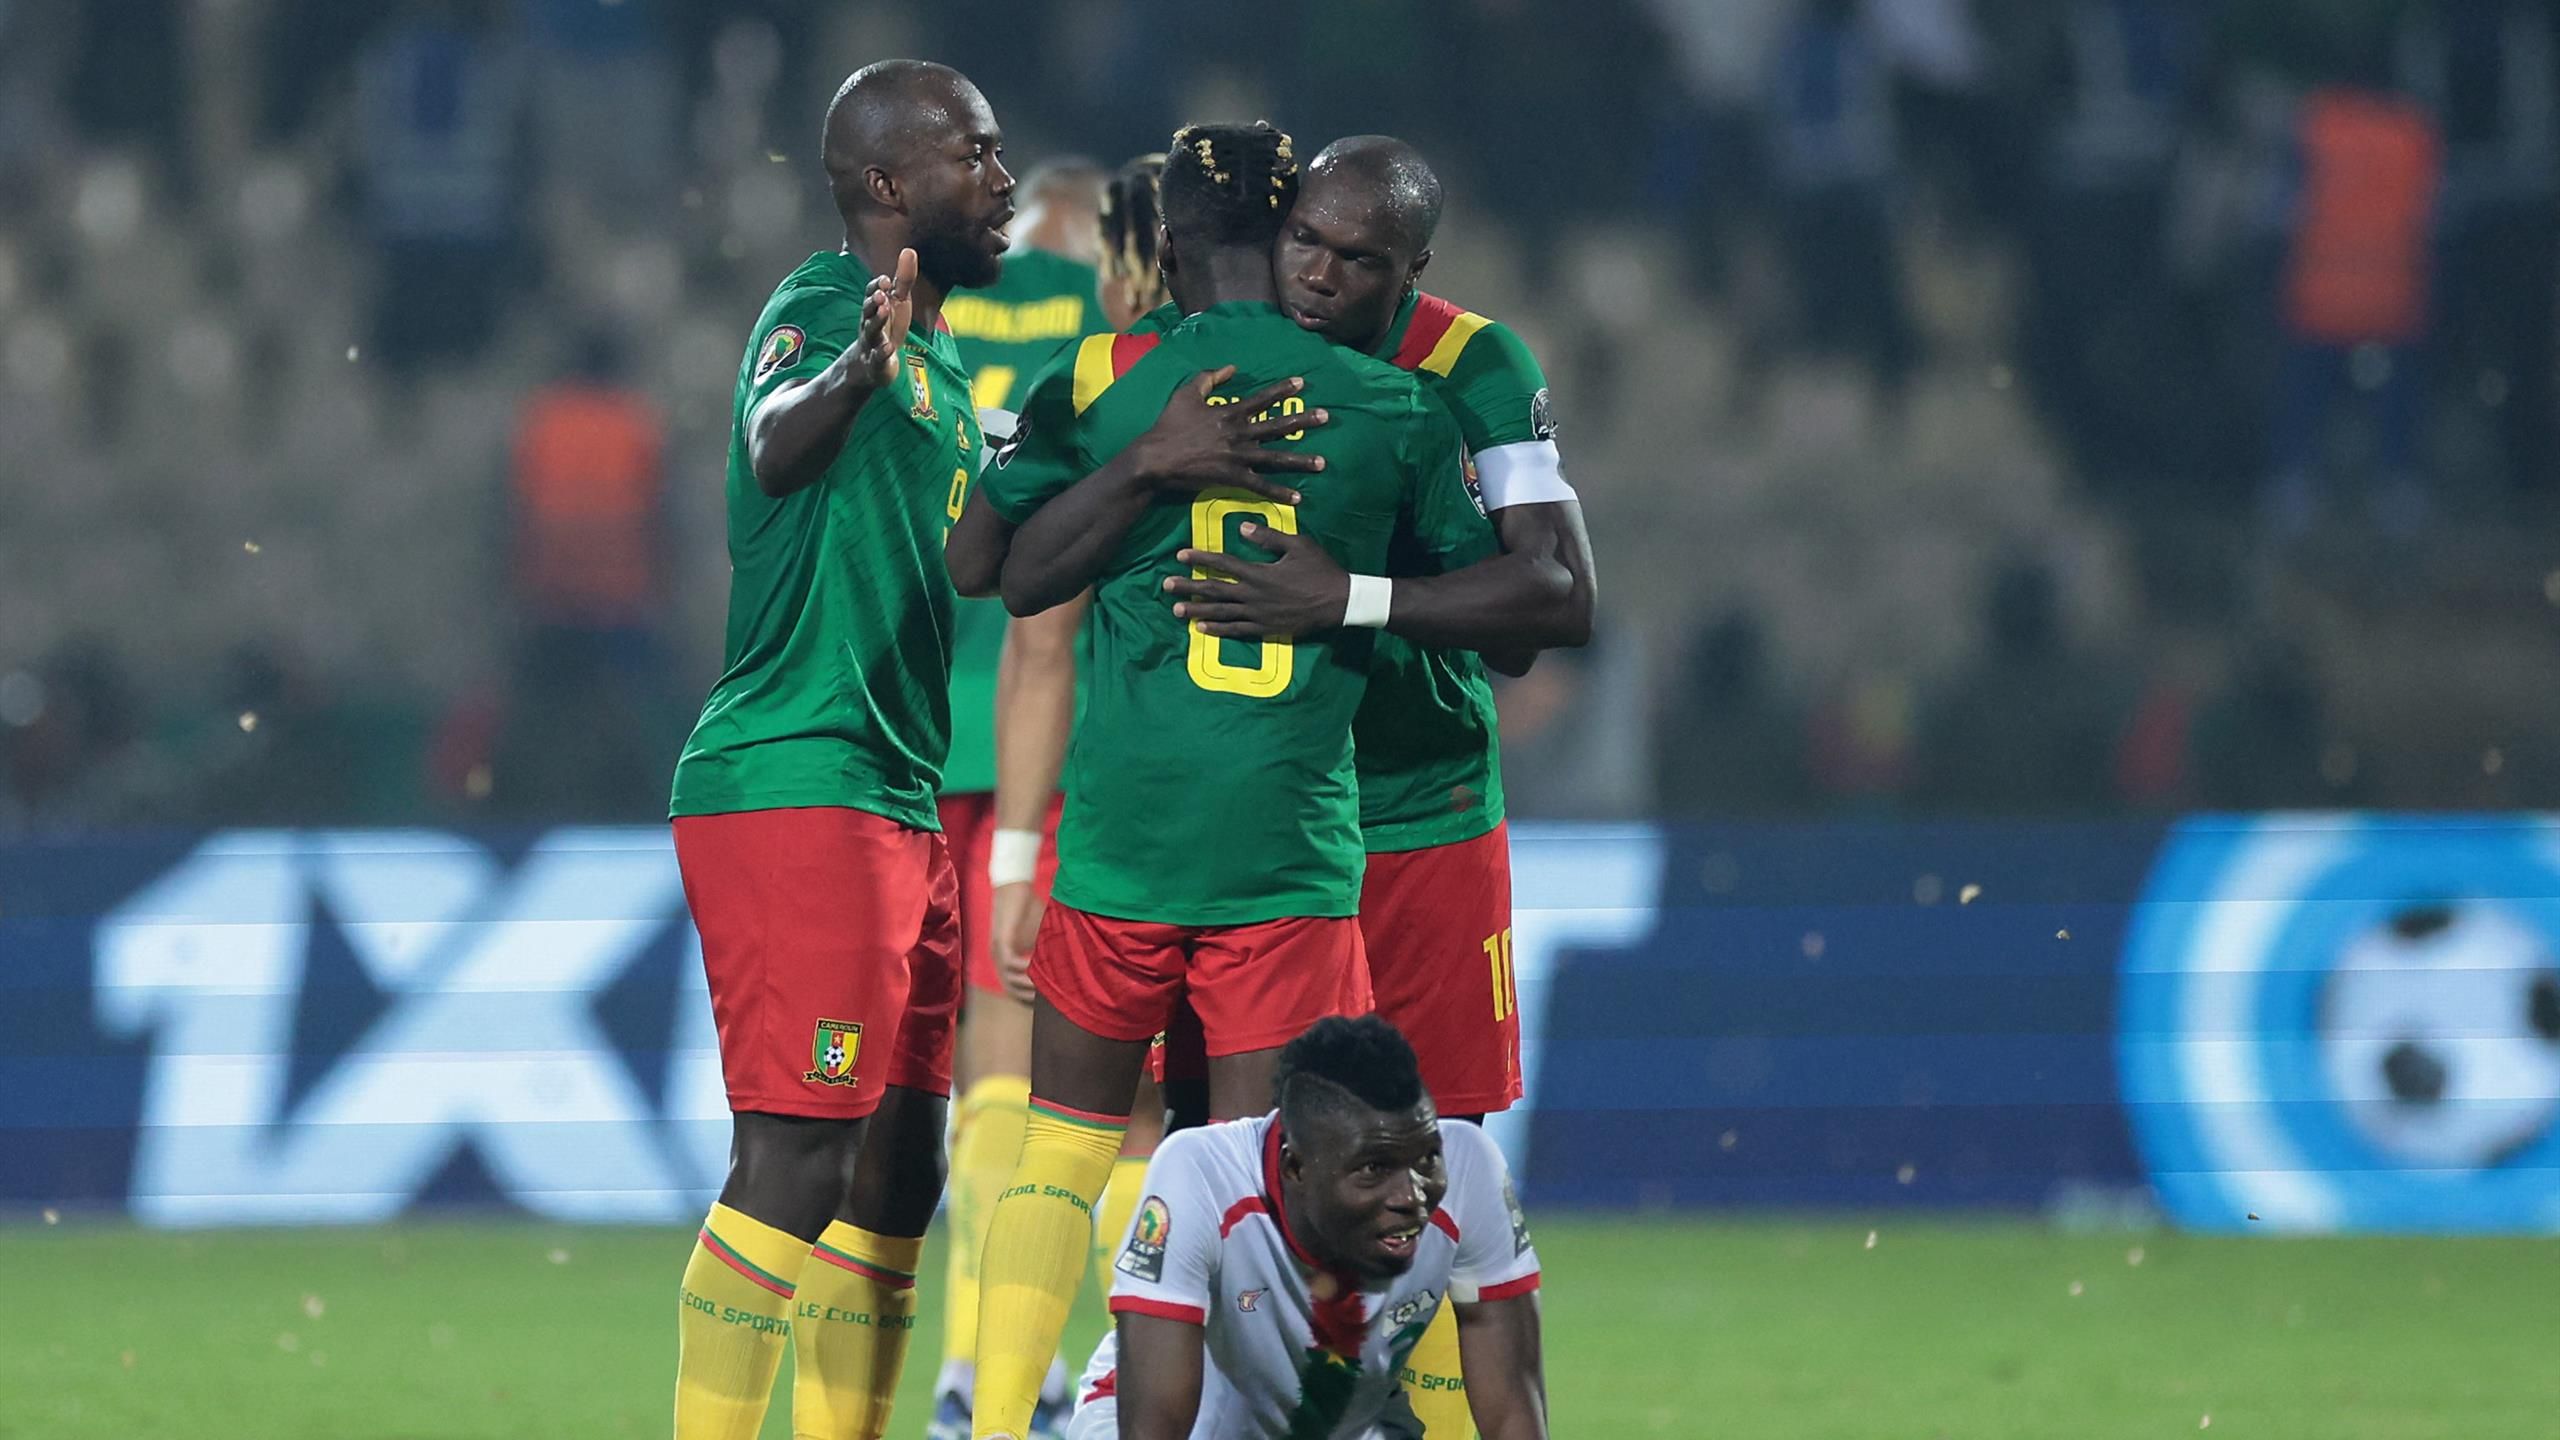 Burkina Faso 3-3p Cameroon Hosts end on a high to claim third place on penalties after remarkable comeback